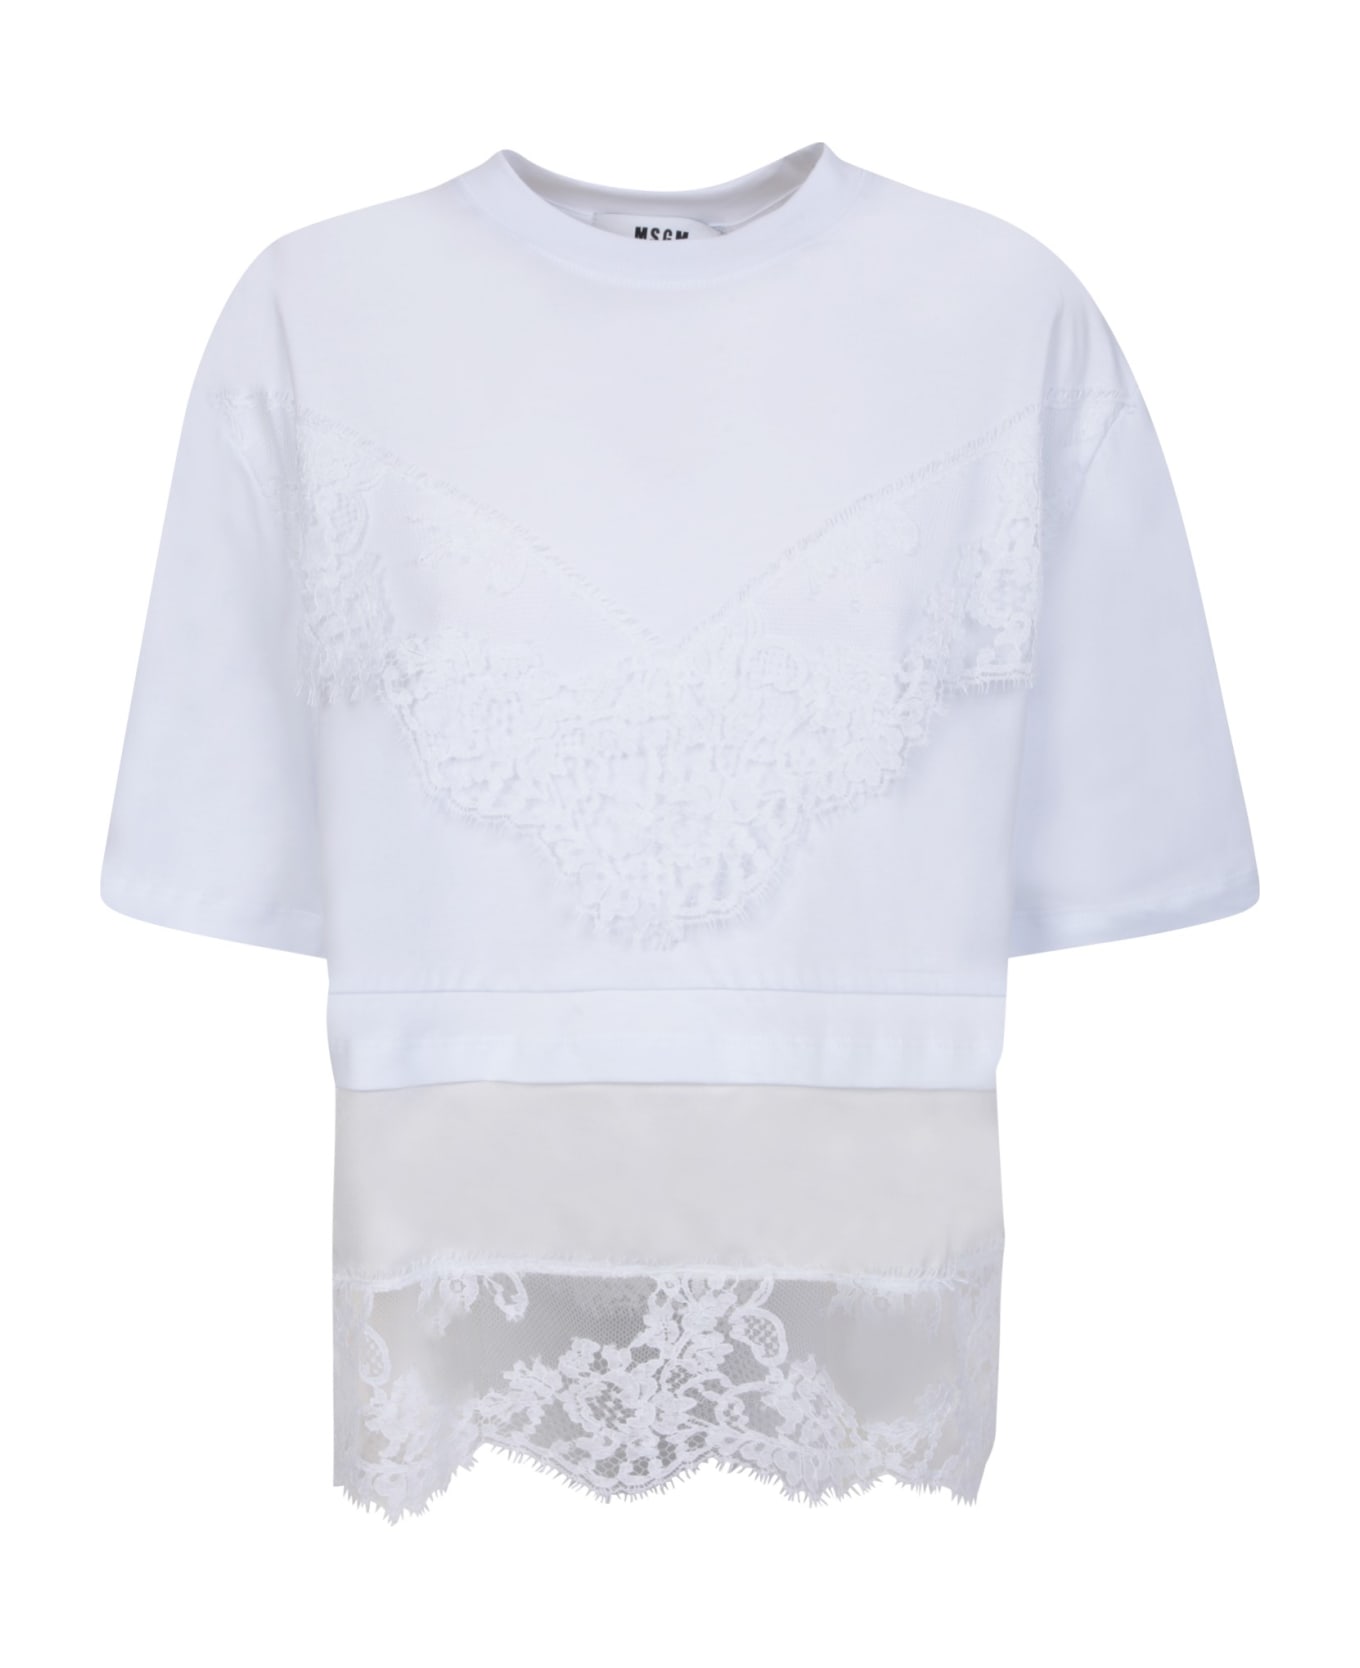 MSGM Embroidered Lace White T-shirt - White